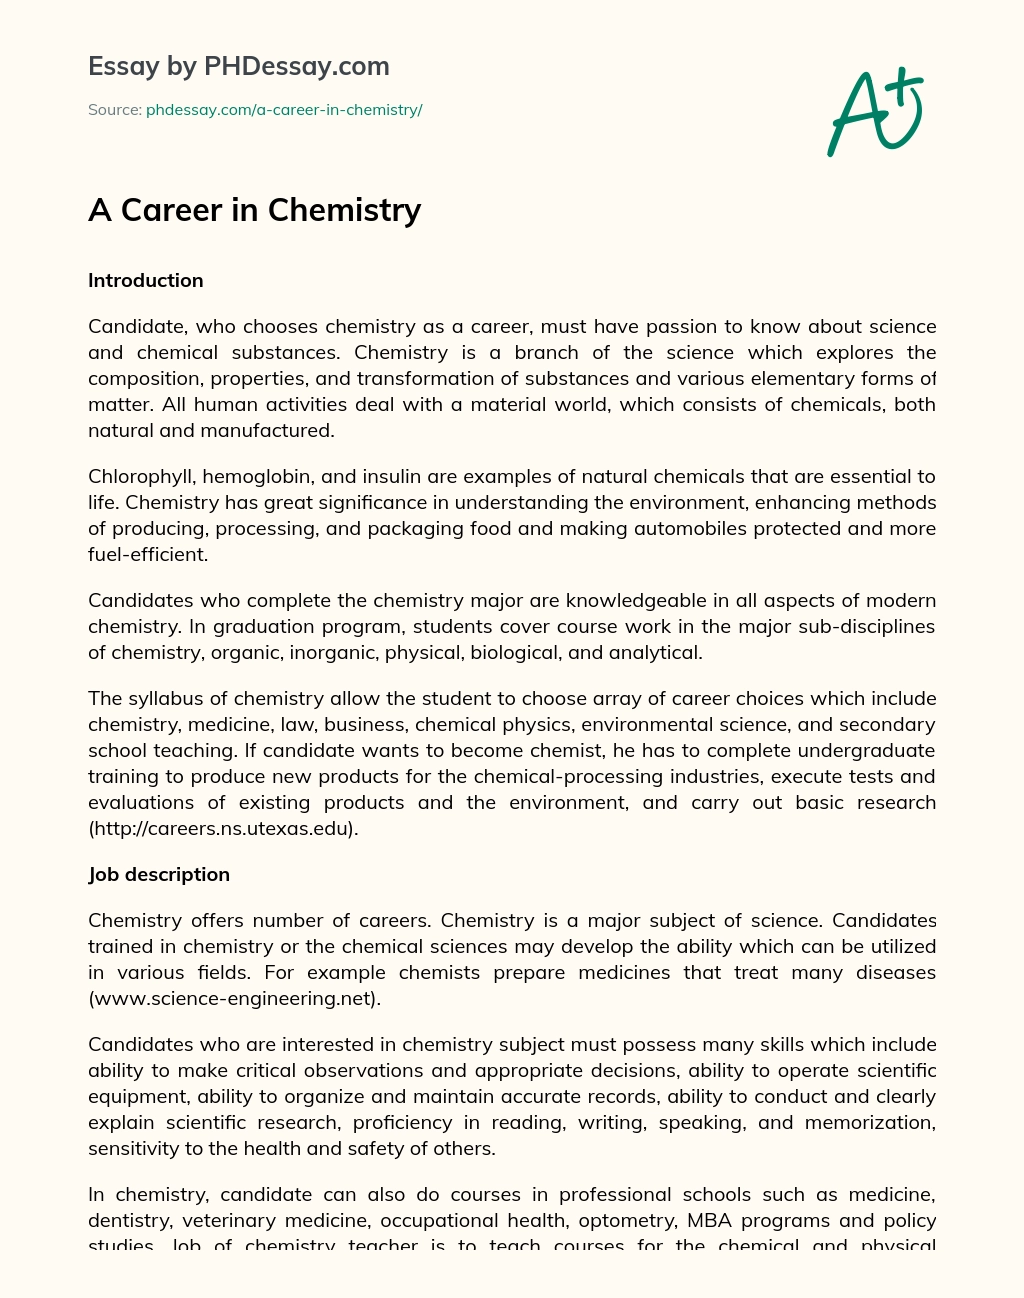 A Career in Chemistry essay